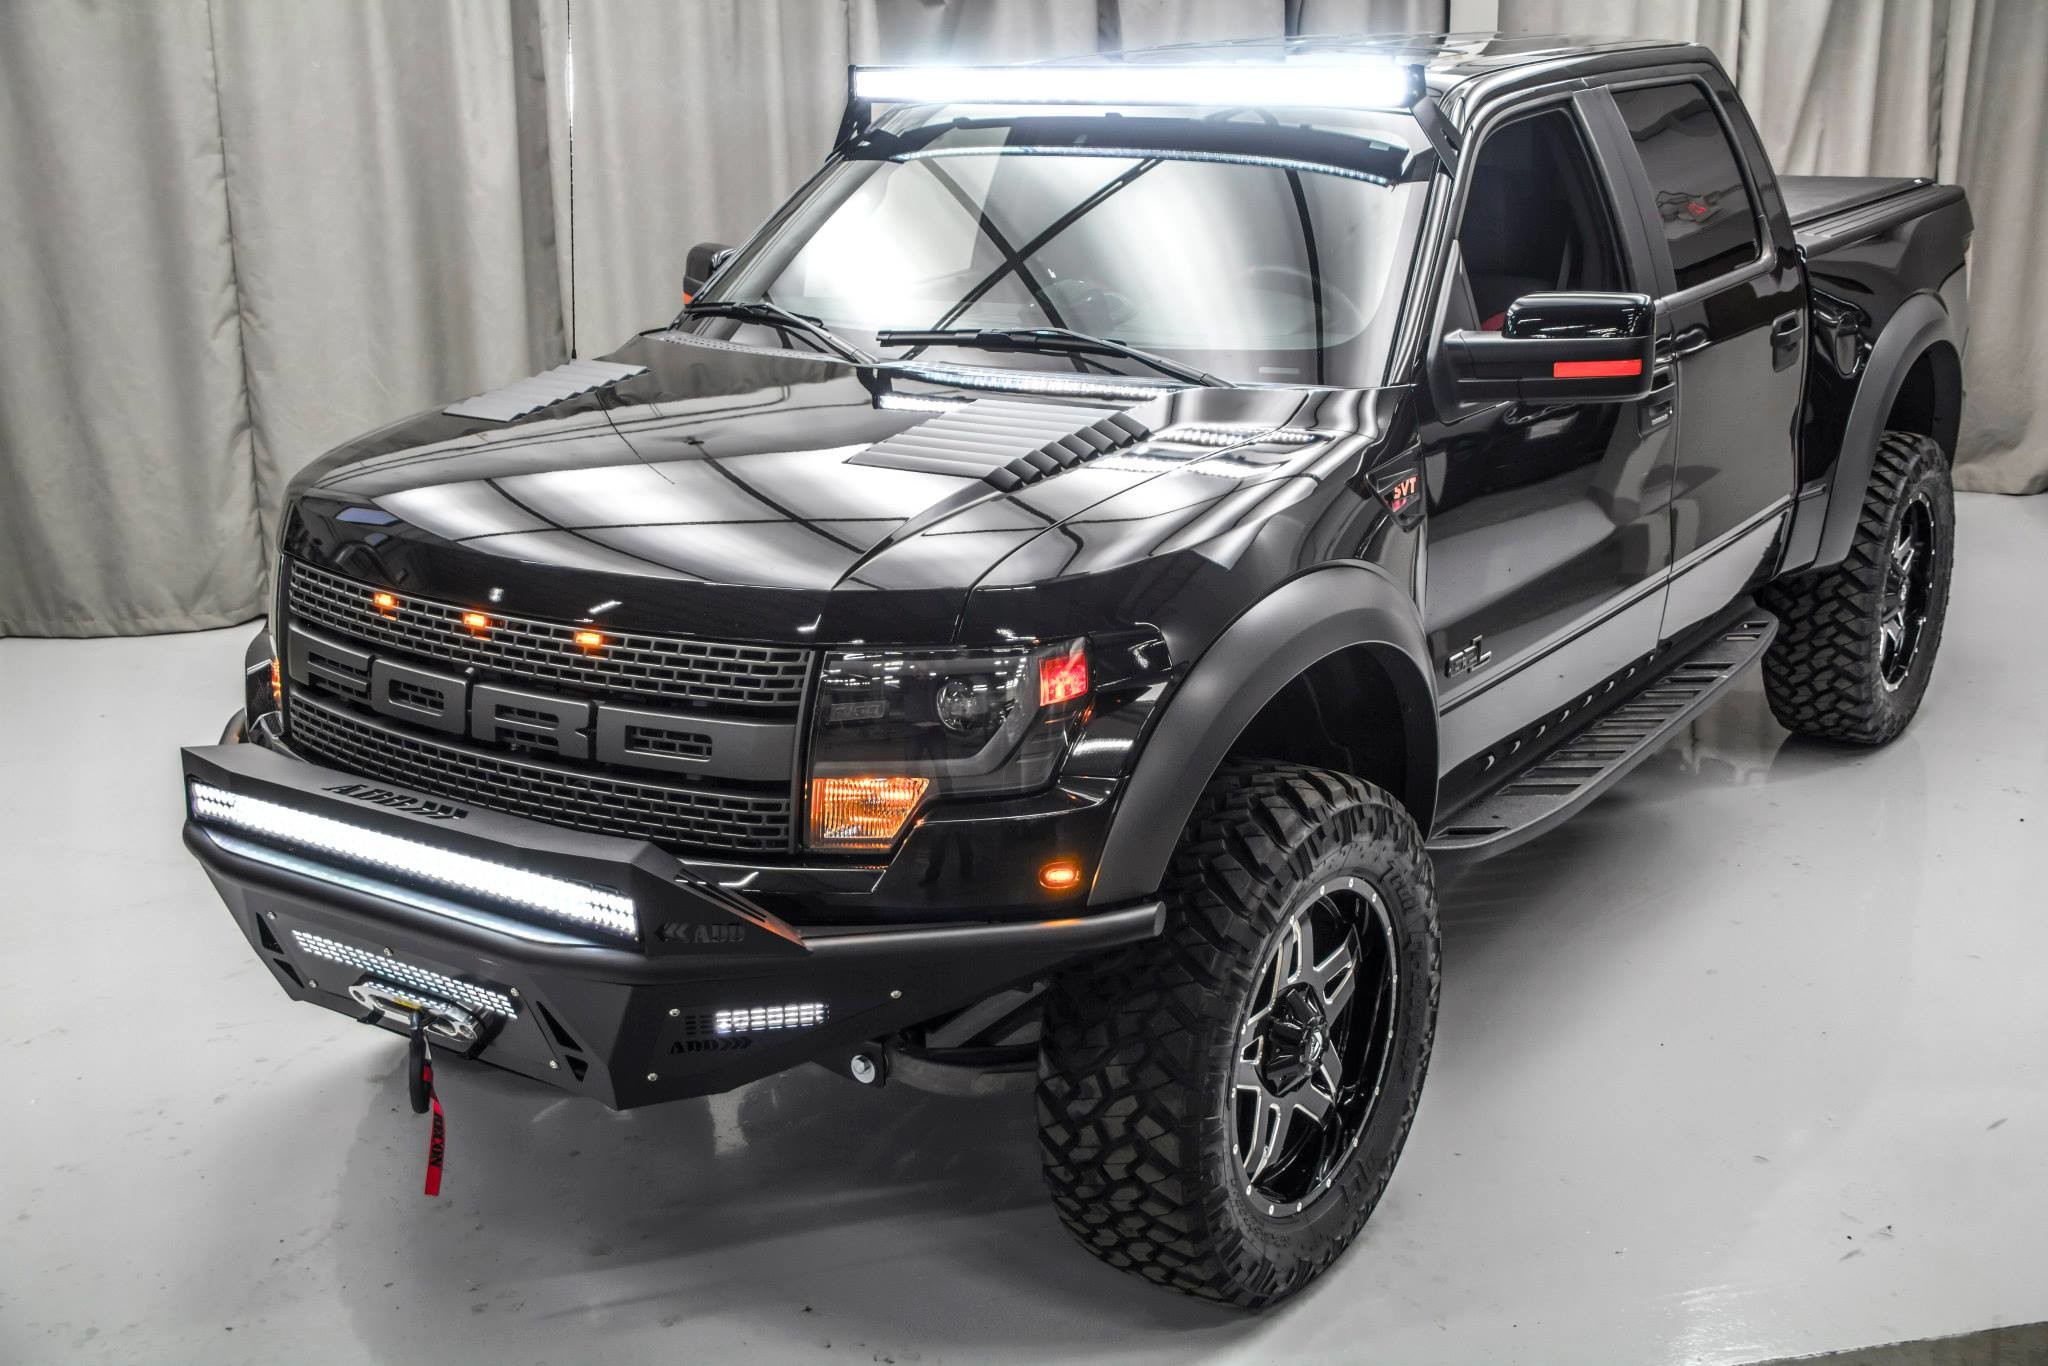 2048x1366 2015 Ford Raptor Wallpaper Iphone